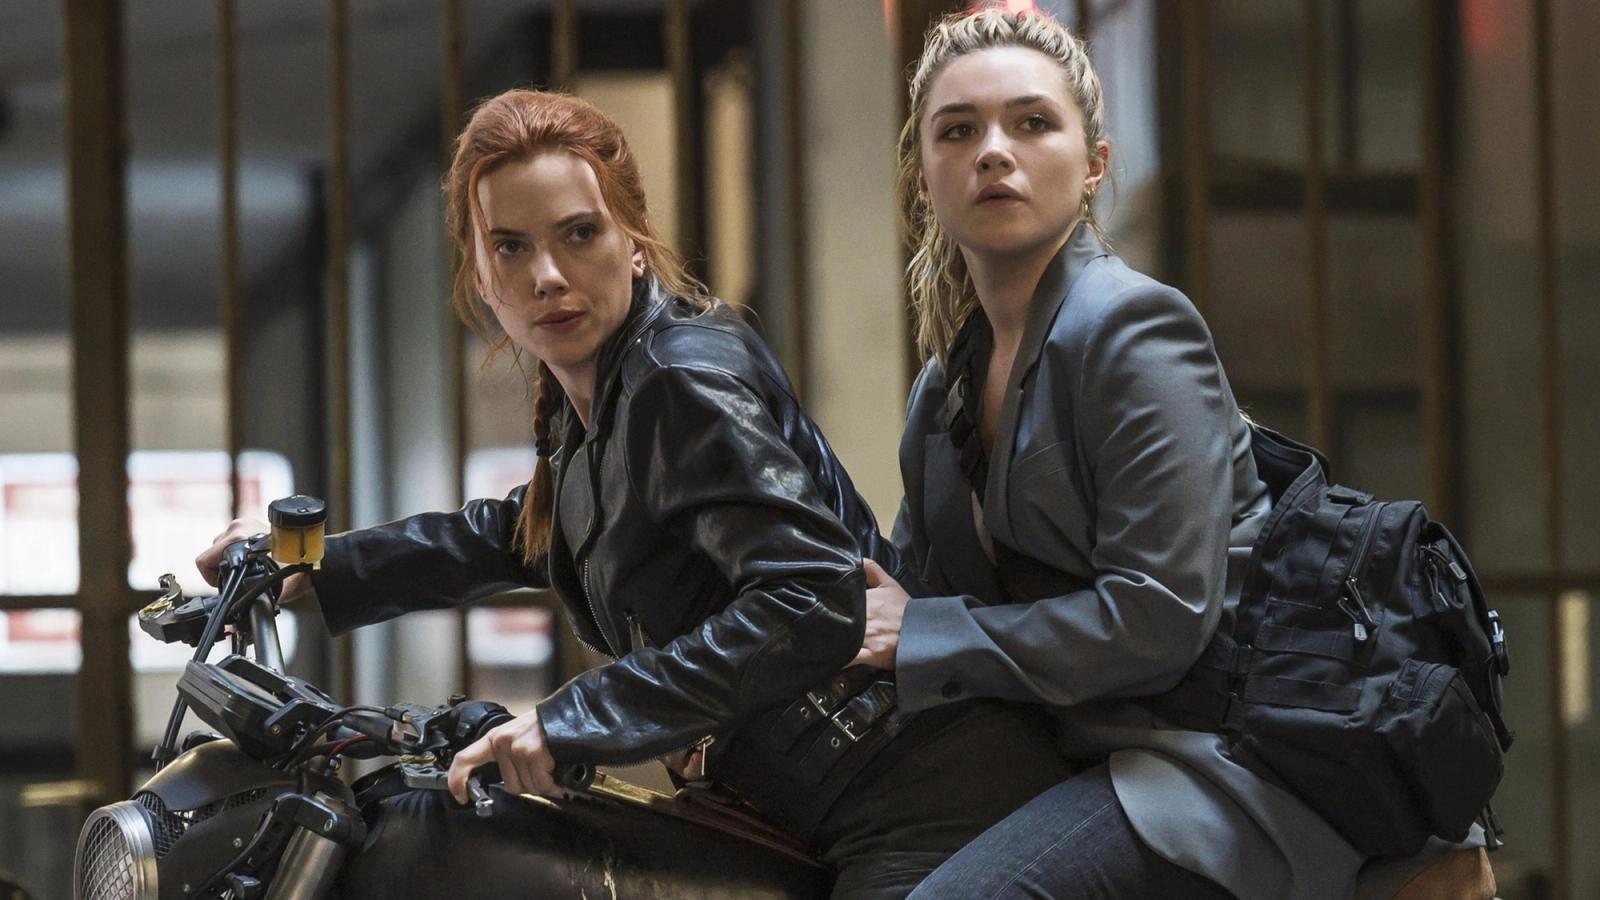 Scarlett Johansson and Florence Pugh are on a motorbike.